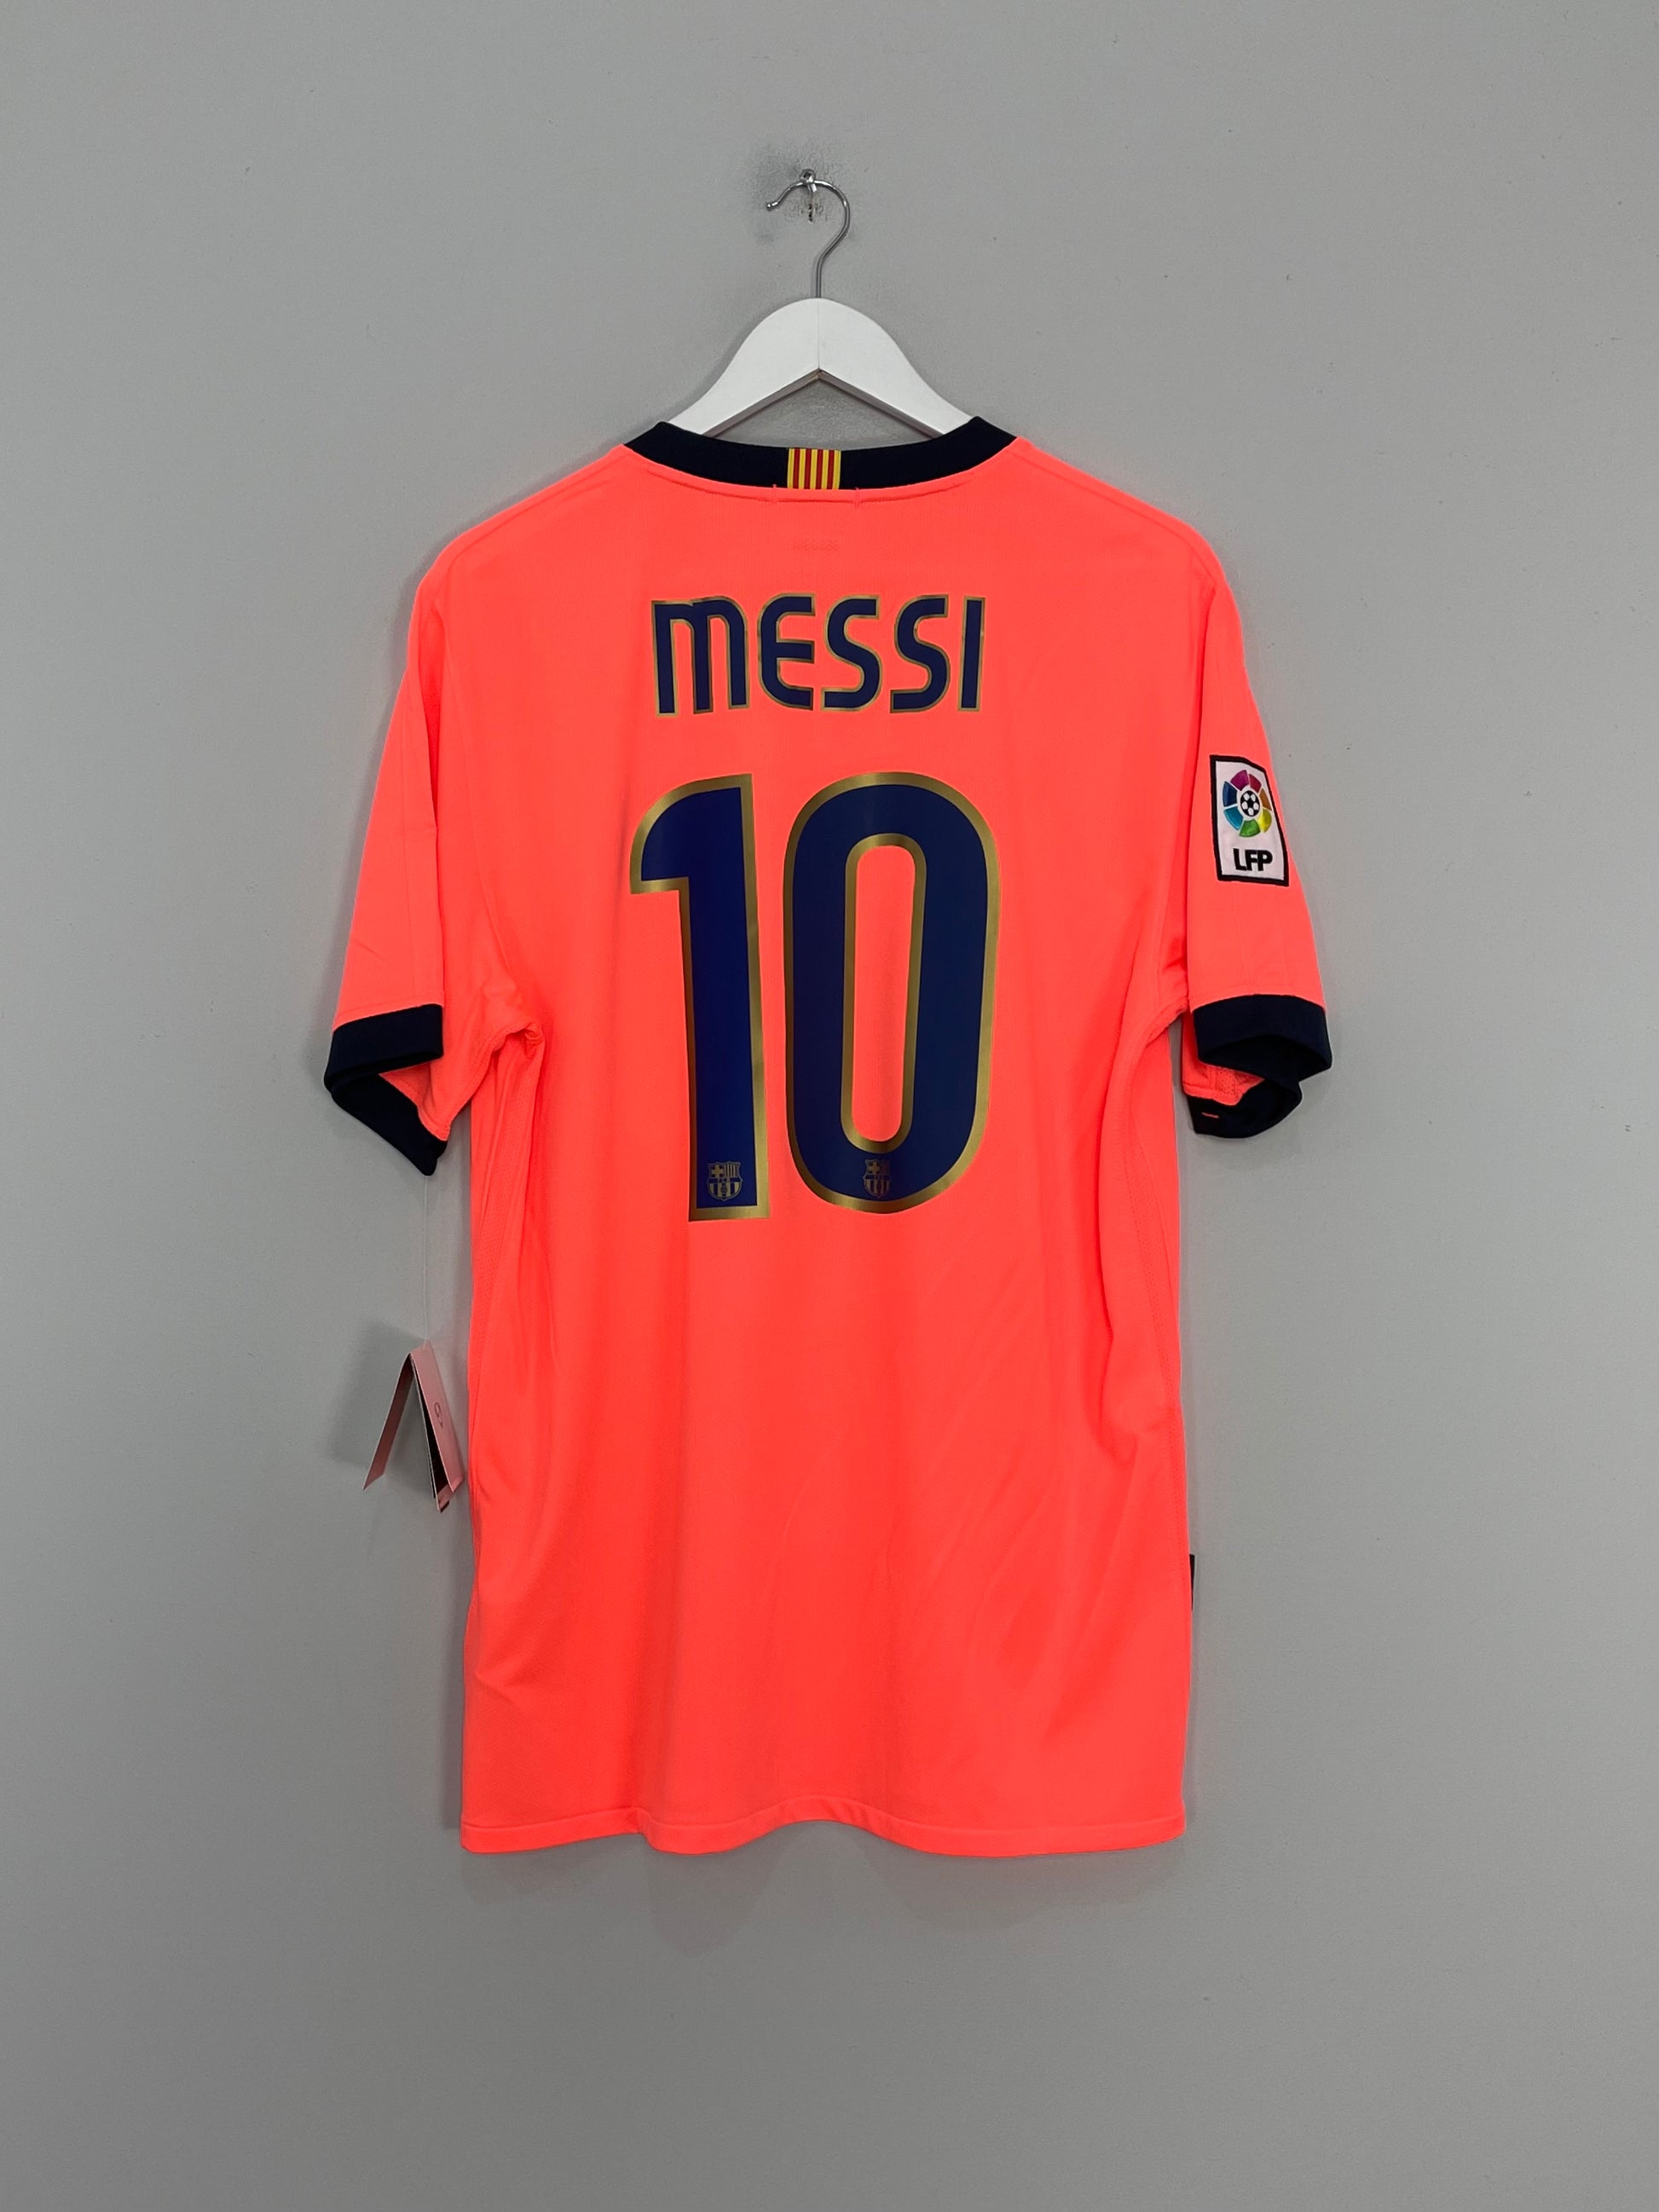 Image of the Barcelona Messi shirt from the 2009/10 season